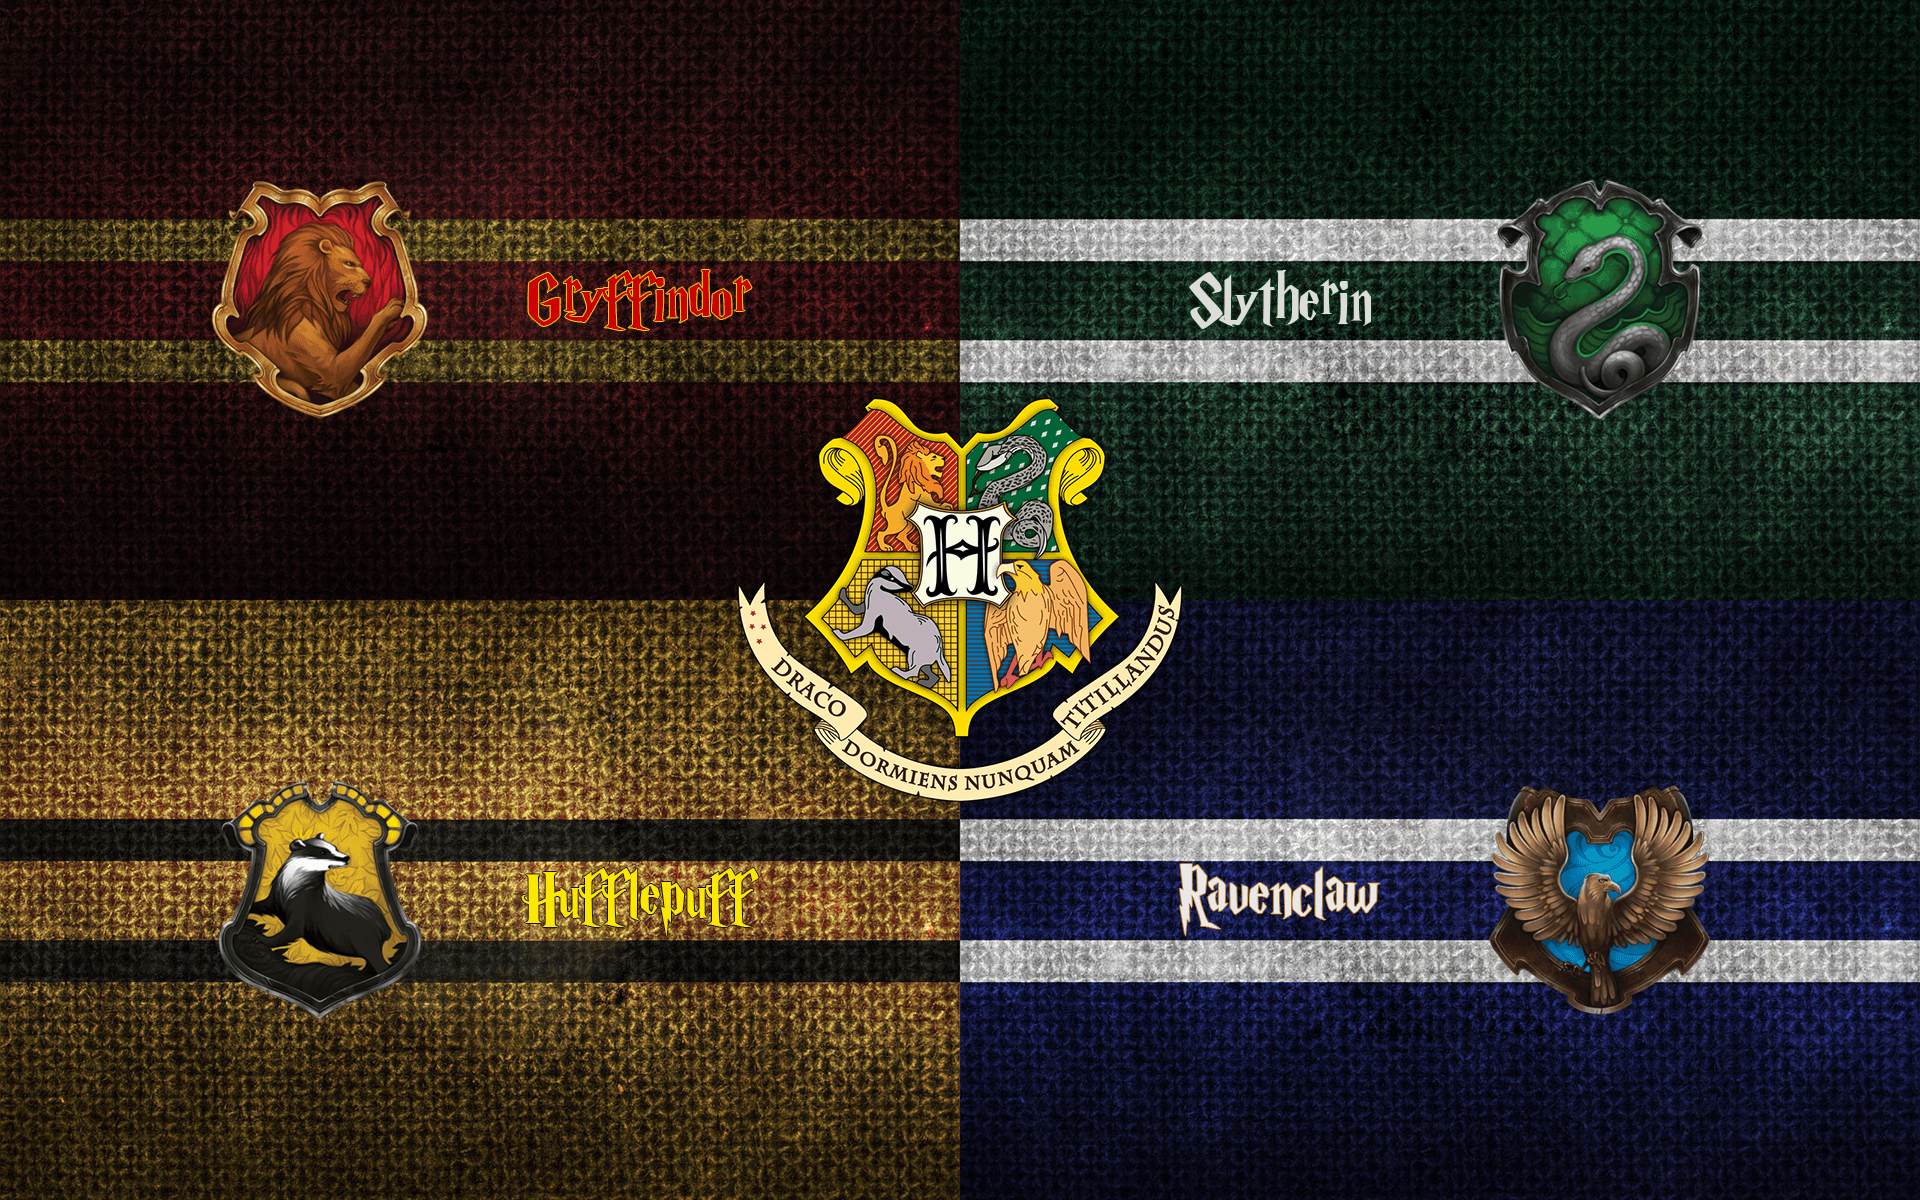 Pictures Of Hogwarts Logo Wallpapers